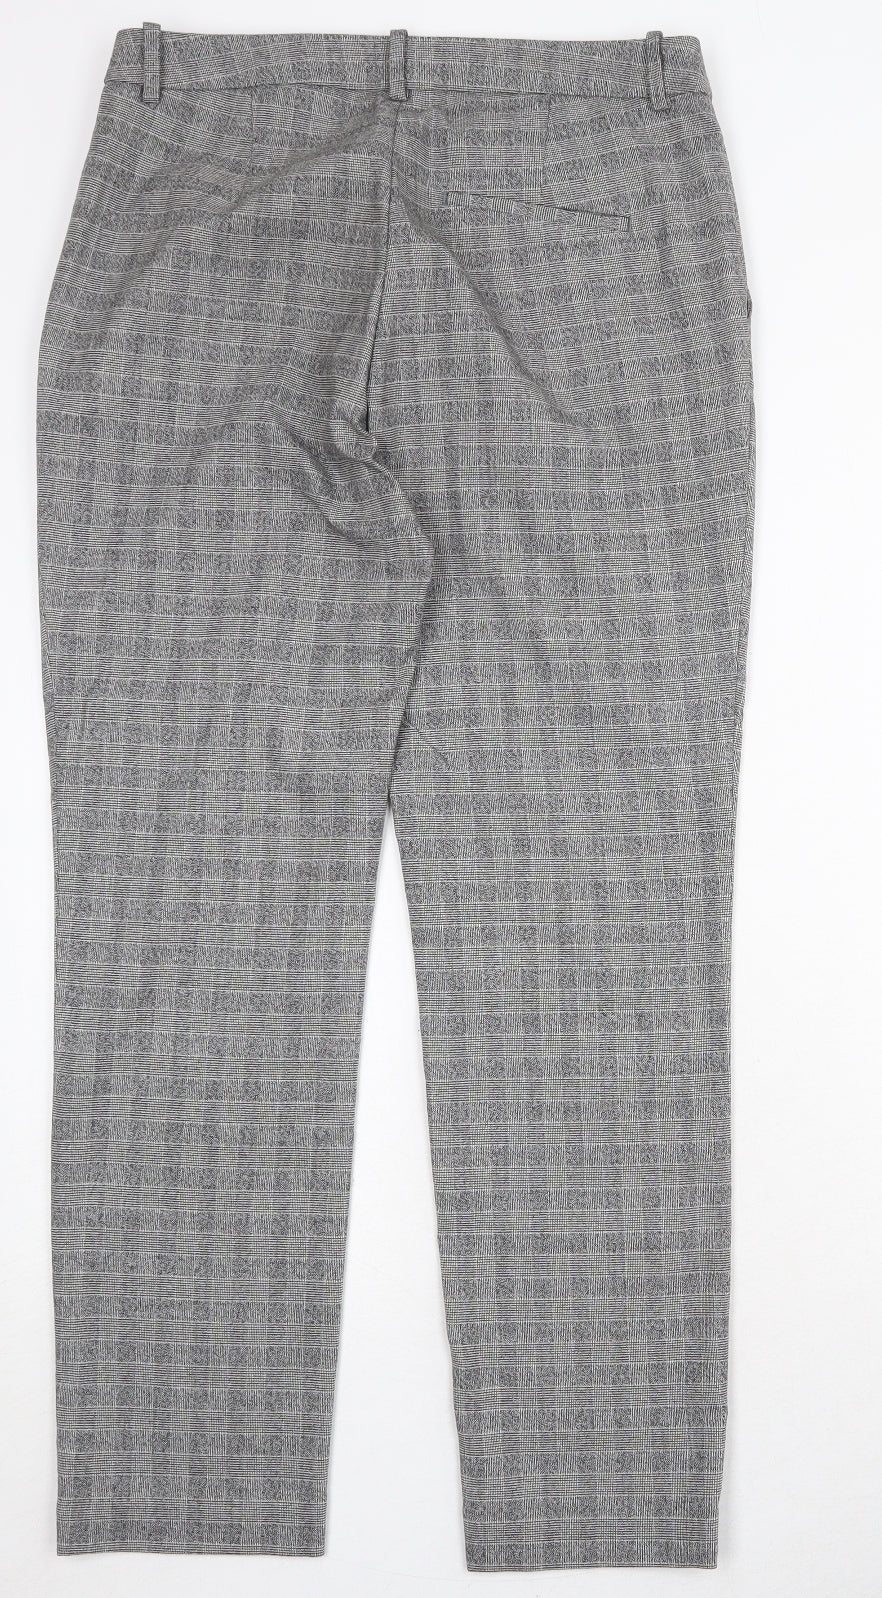 H&M Womens Grey Plaid Polyester Chino Trousers Size 14 Regular Zip